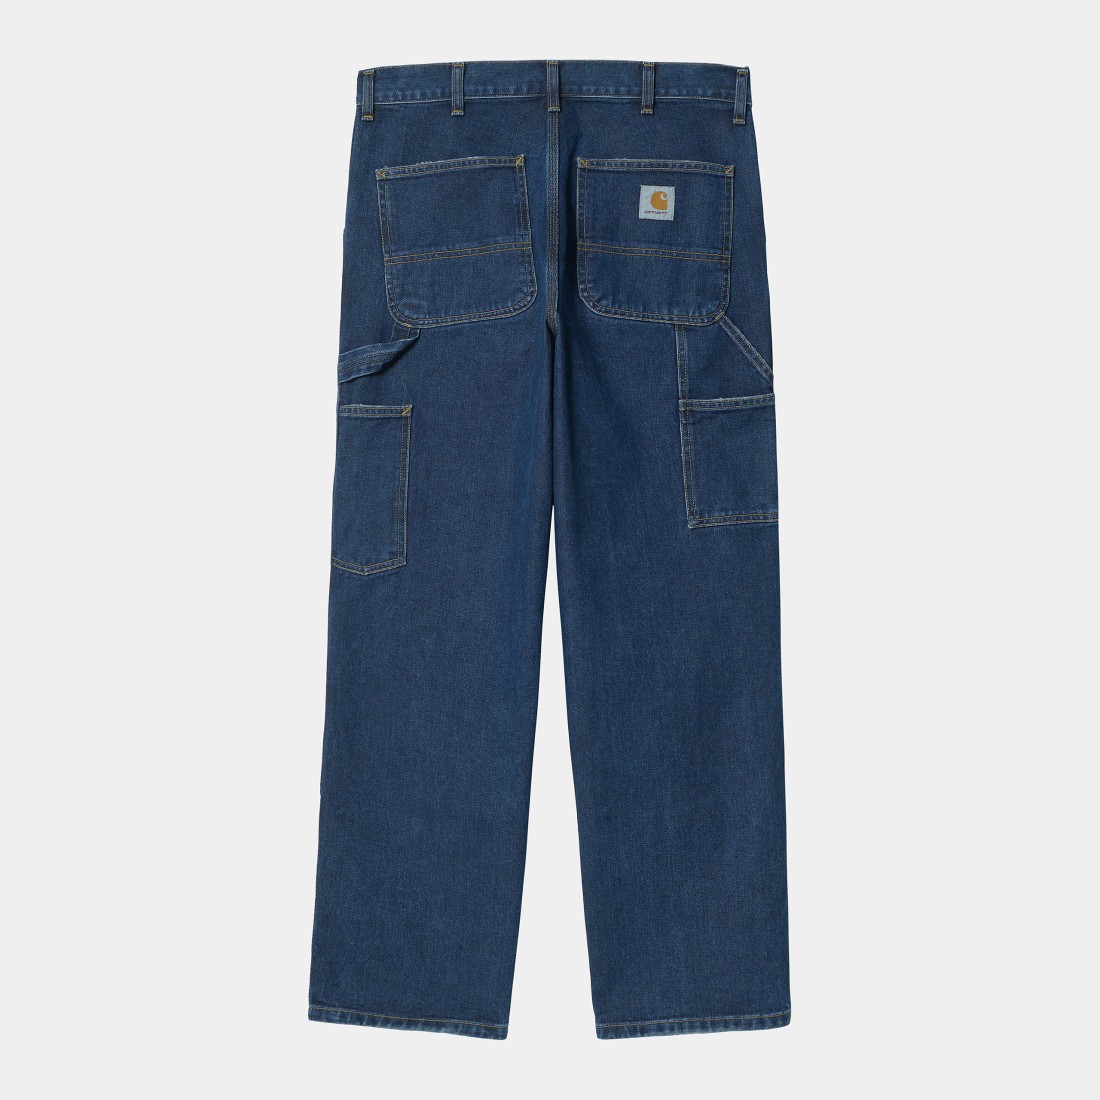 Double Knee Pant Blue Stone Washed Carhartt WIP